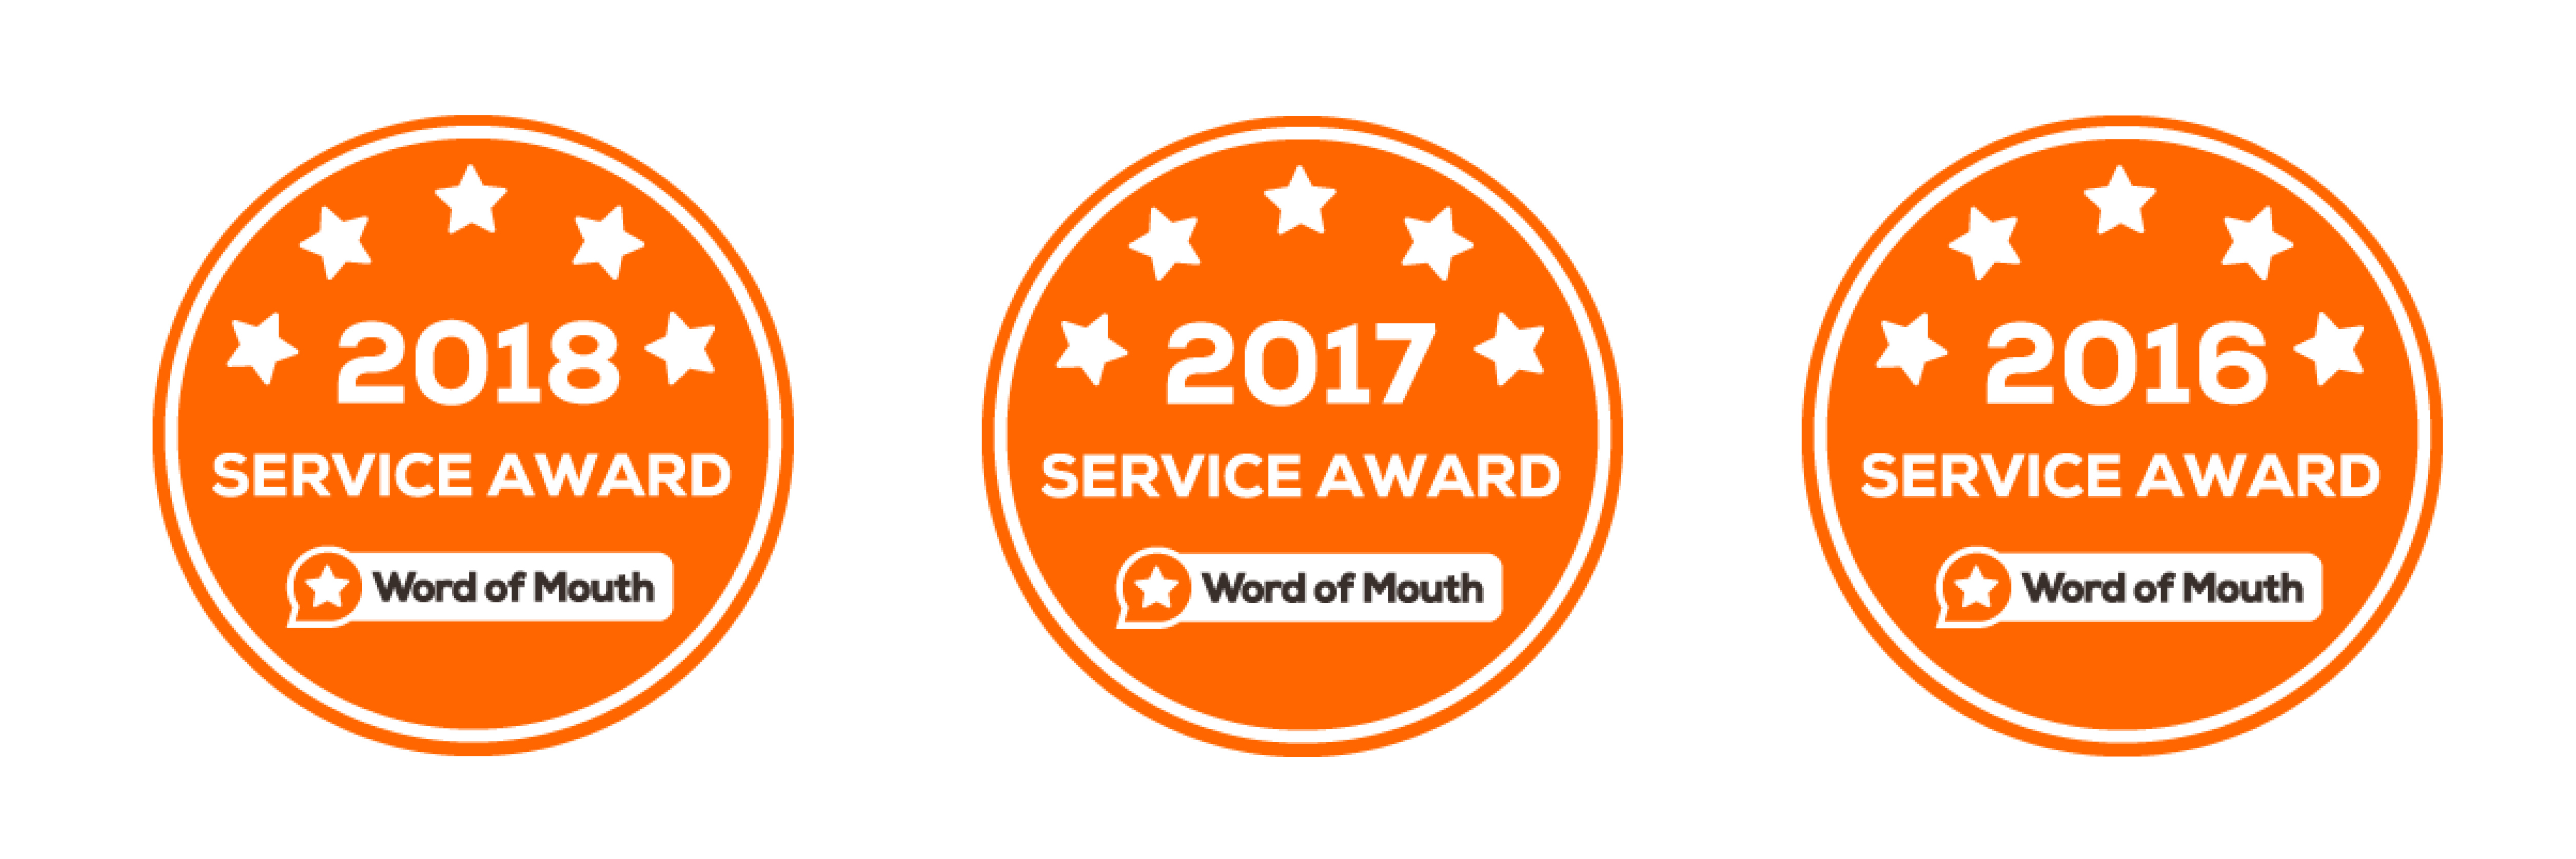 Word of Mouth service award